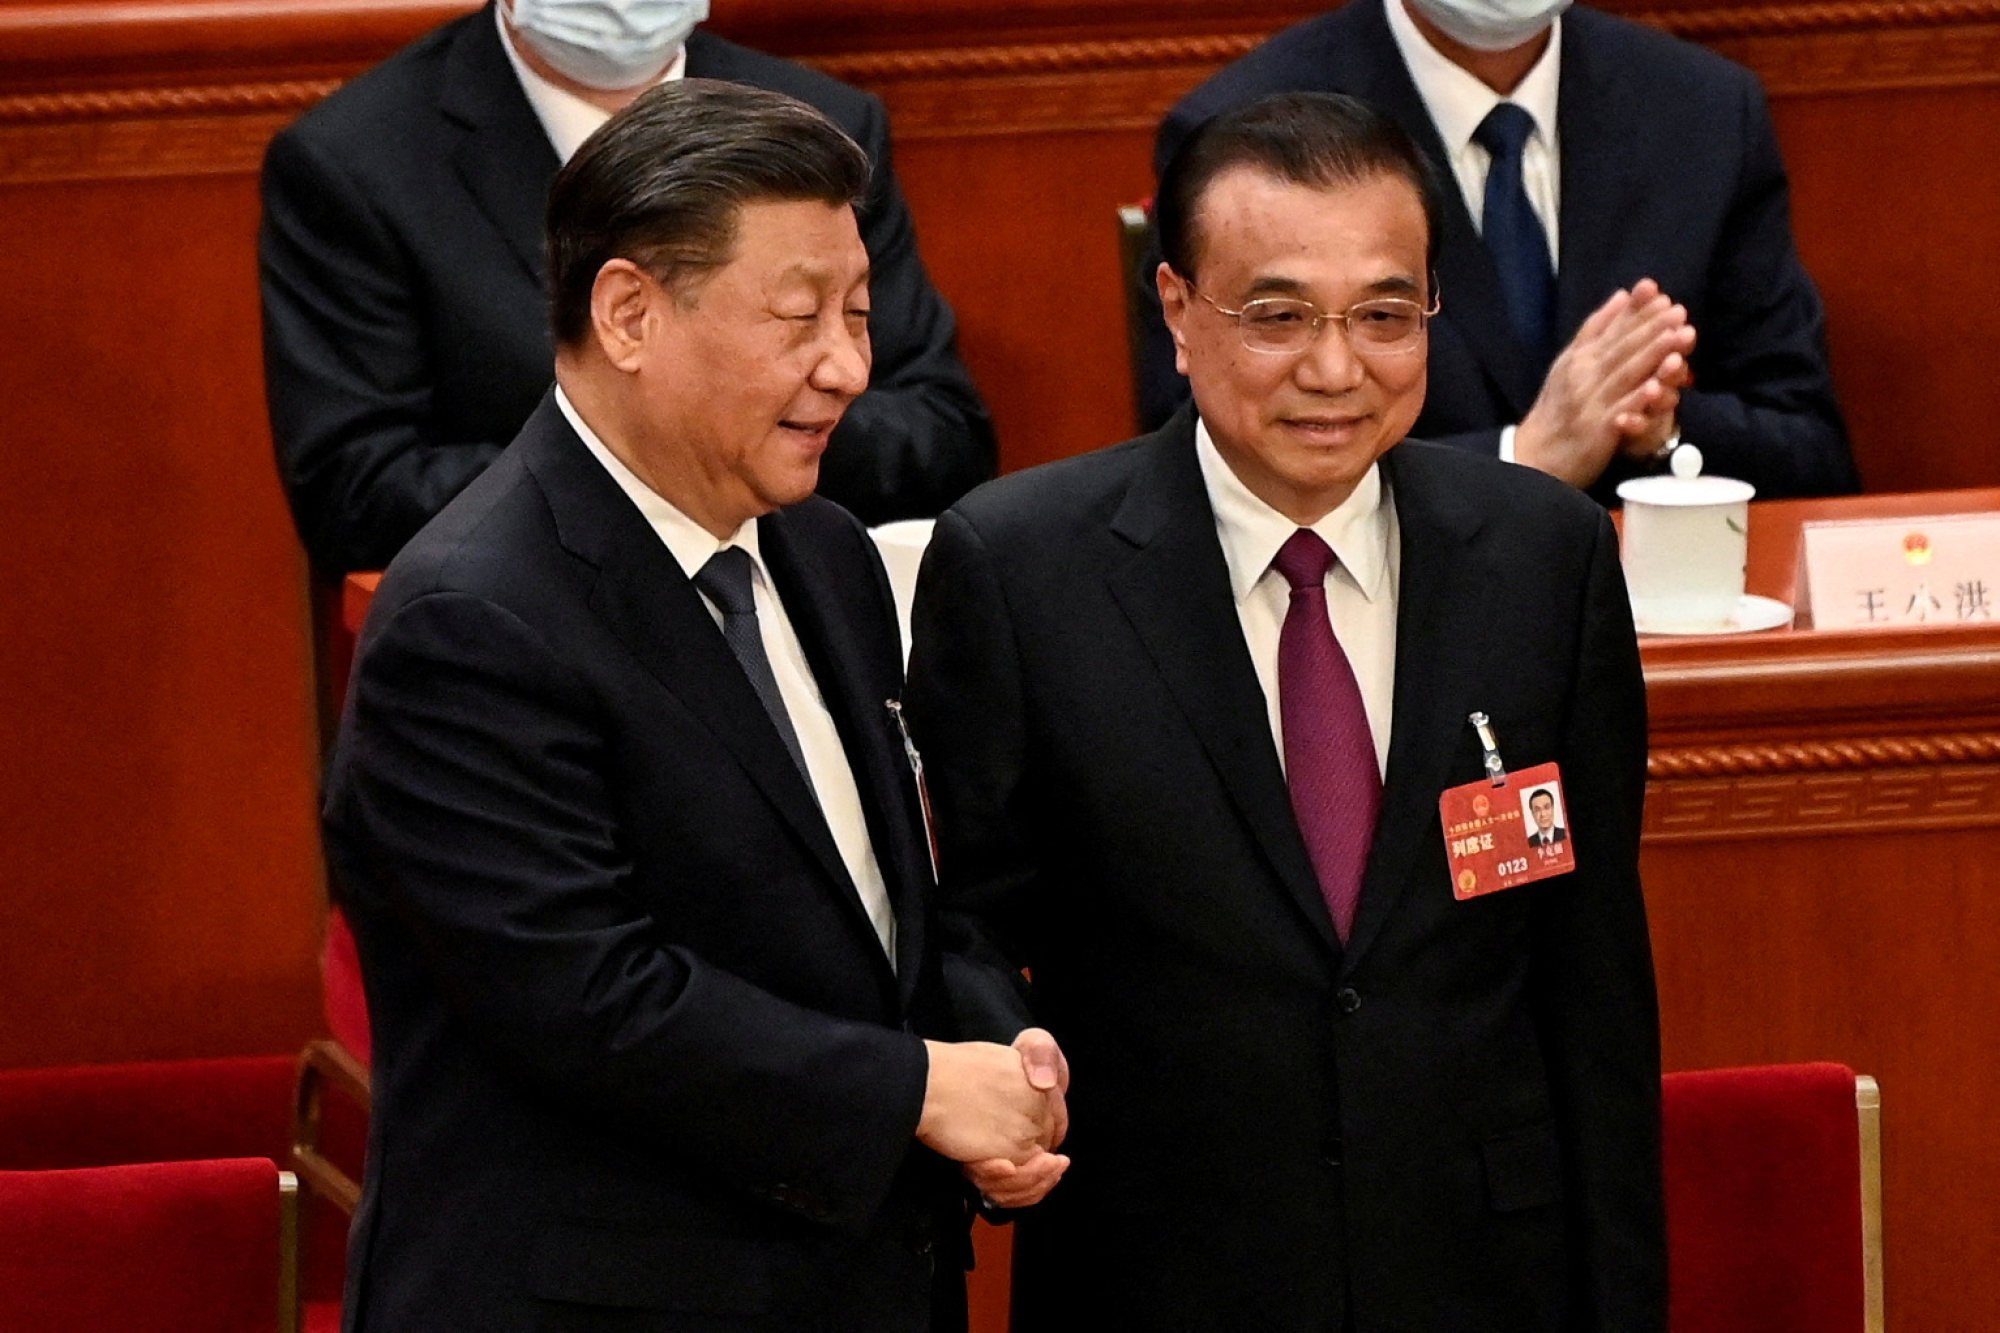 Chinese President Xi Jinping (left) shakes hands with former premier Li Keqiang during the fourth plenary session of the National People’s Congress at the Great Hall in March, which marked Li’s retirement after serving two five-year terms. Photo: Reuters